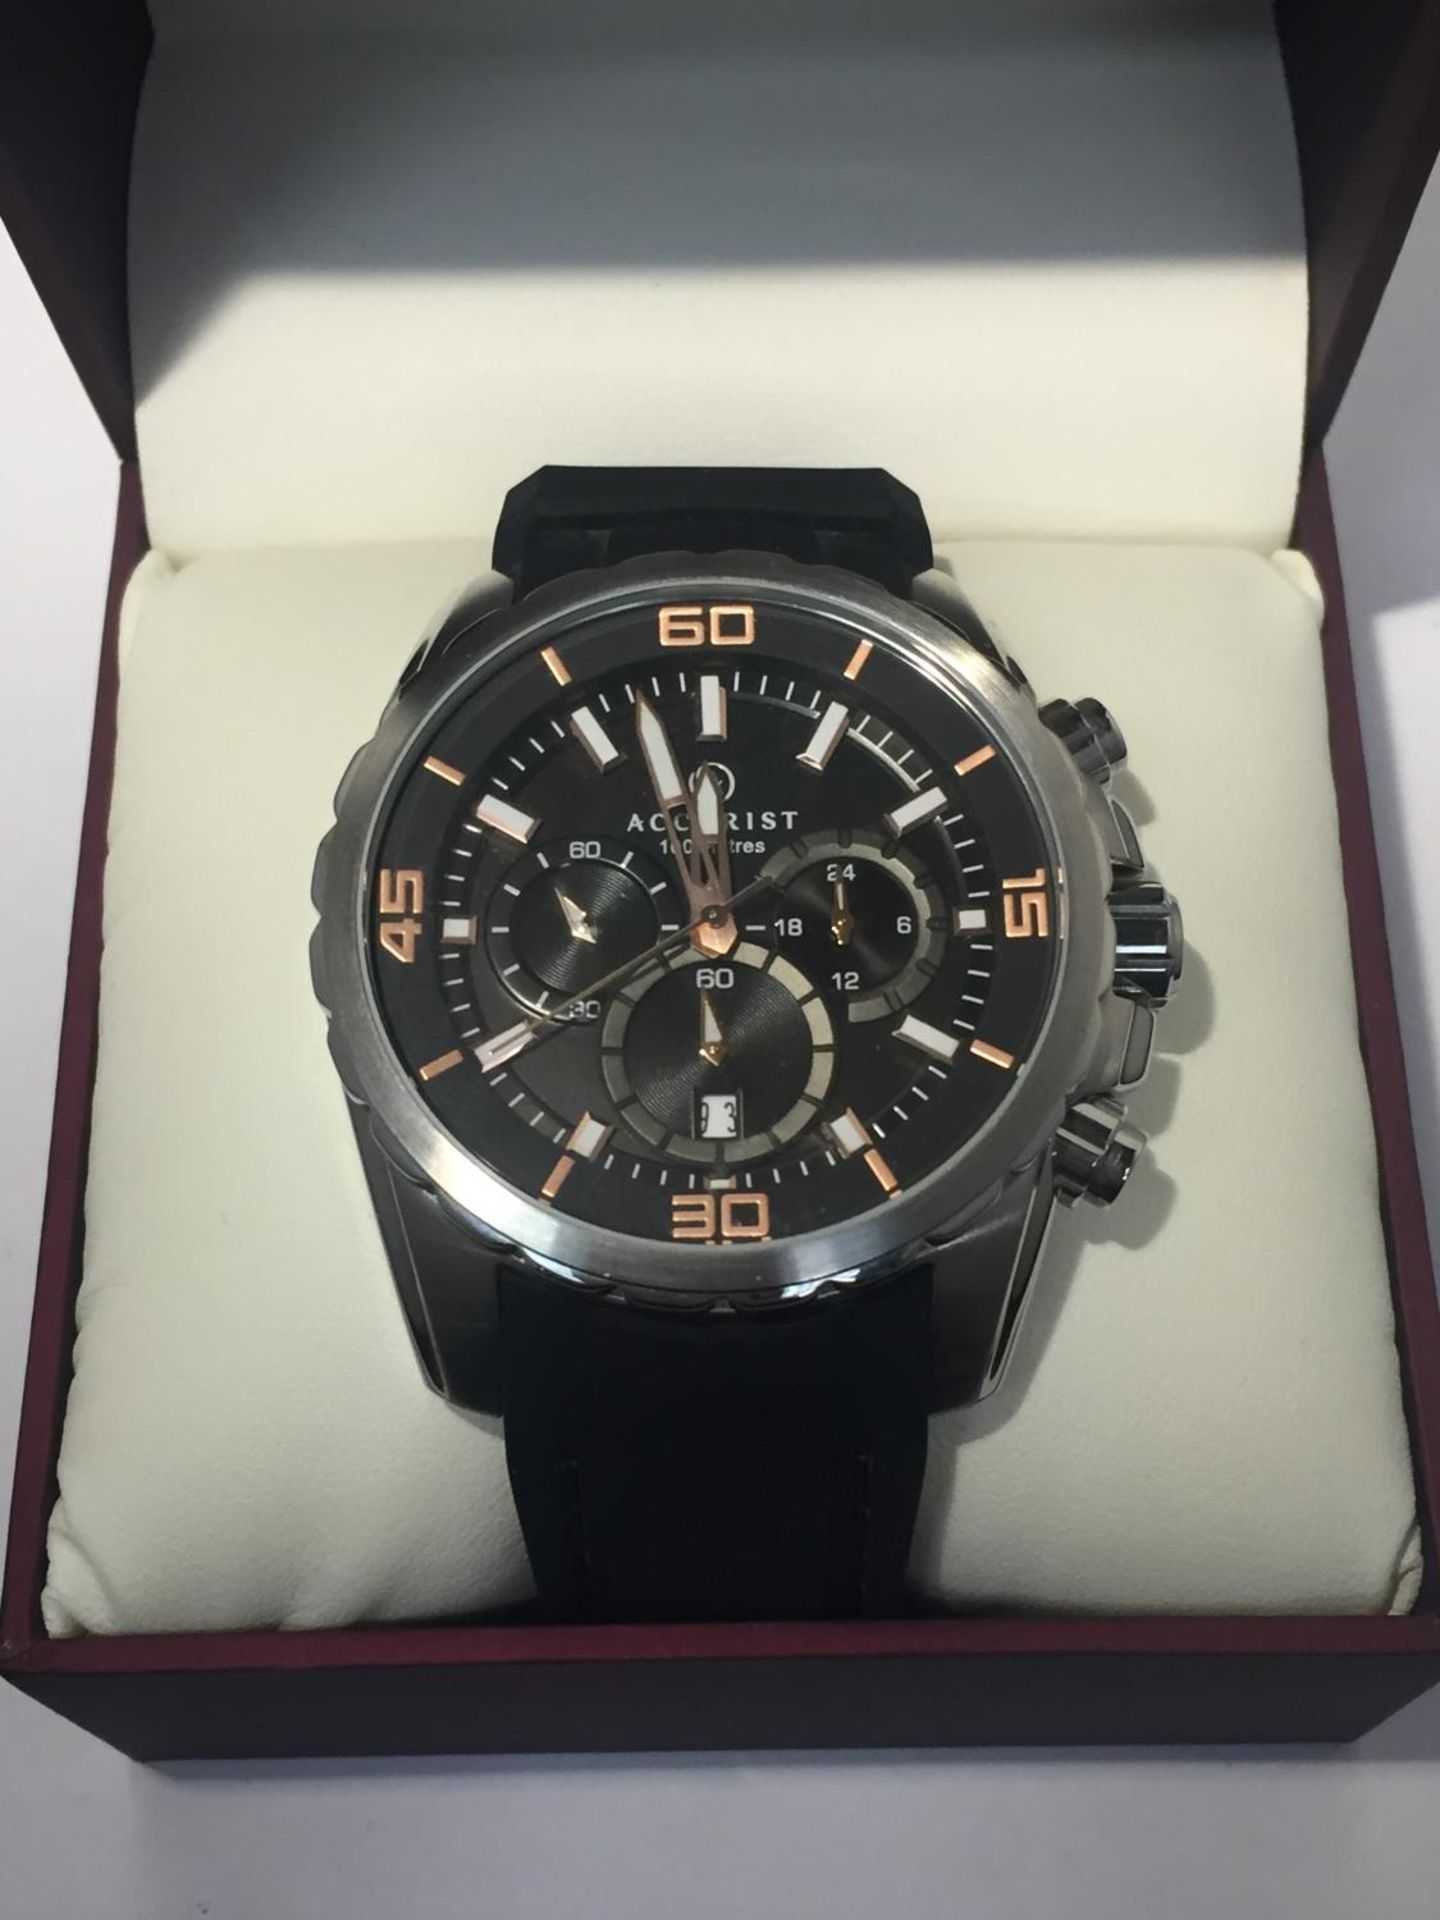 A NEW AND BOXED ACCURIST CHRONOGRAPH WRISTWATCH IN WORKING ORDER - Image 3 of 5